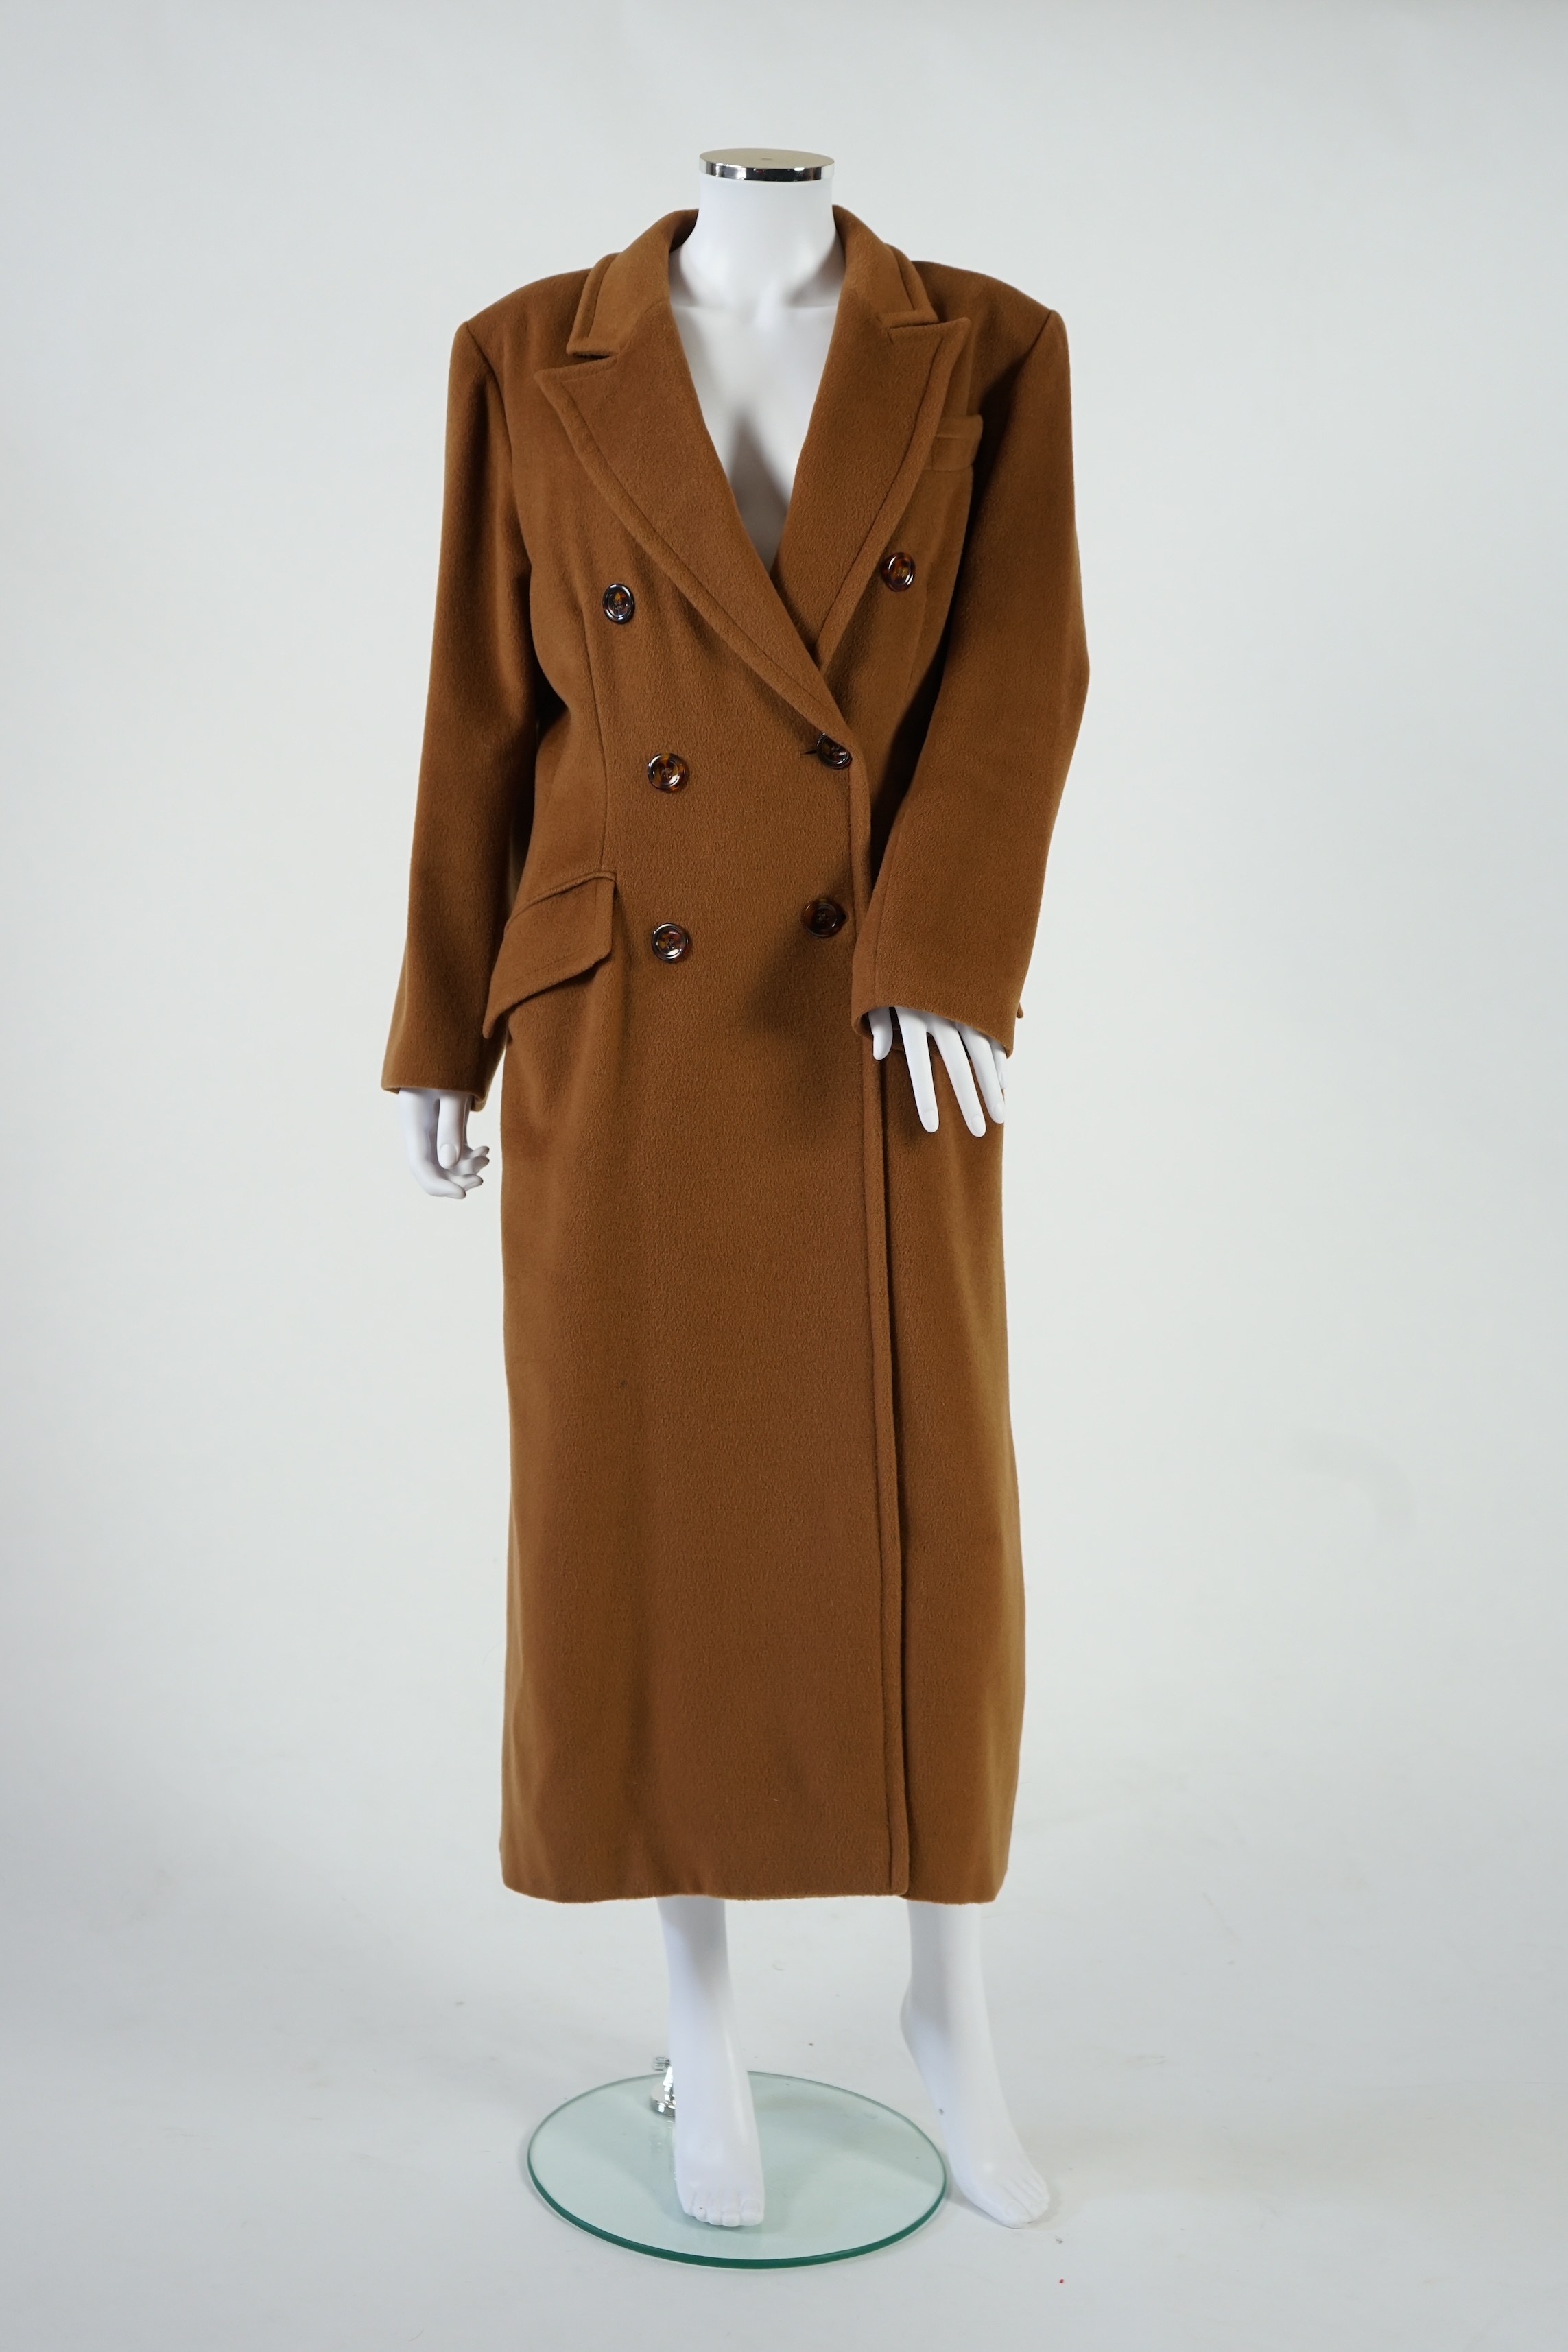 A vintage Yves Saint Laurent variation lady's dark tan double breasted wool long coat, F 40 (UK 12). Proceeds to Happy Paws Puppy Rescue